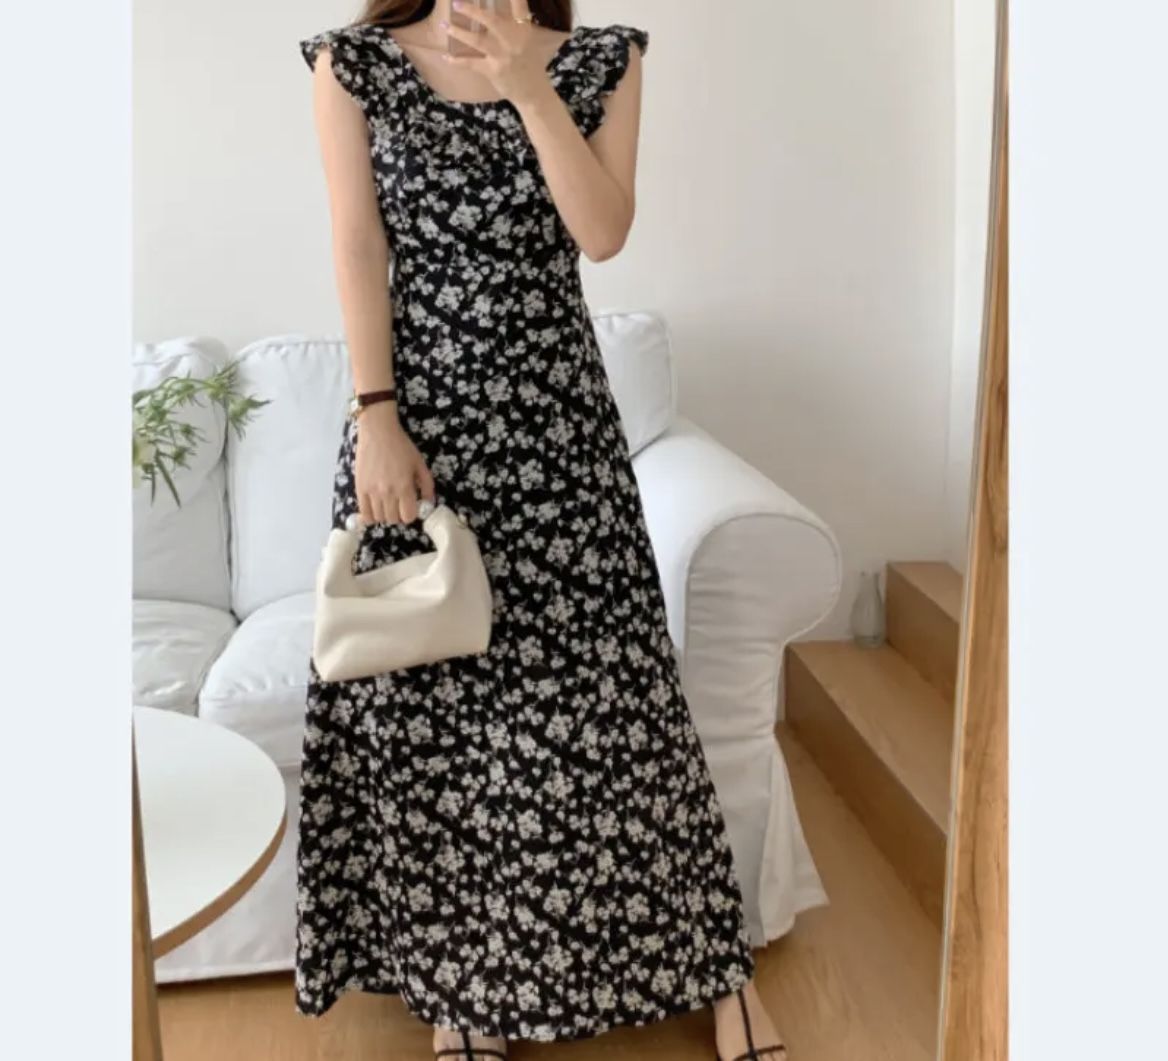 Ruffle Maxi Long Summer Floral Vintage Dress Size S/M Brand new